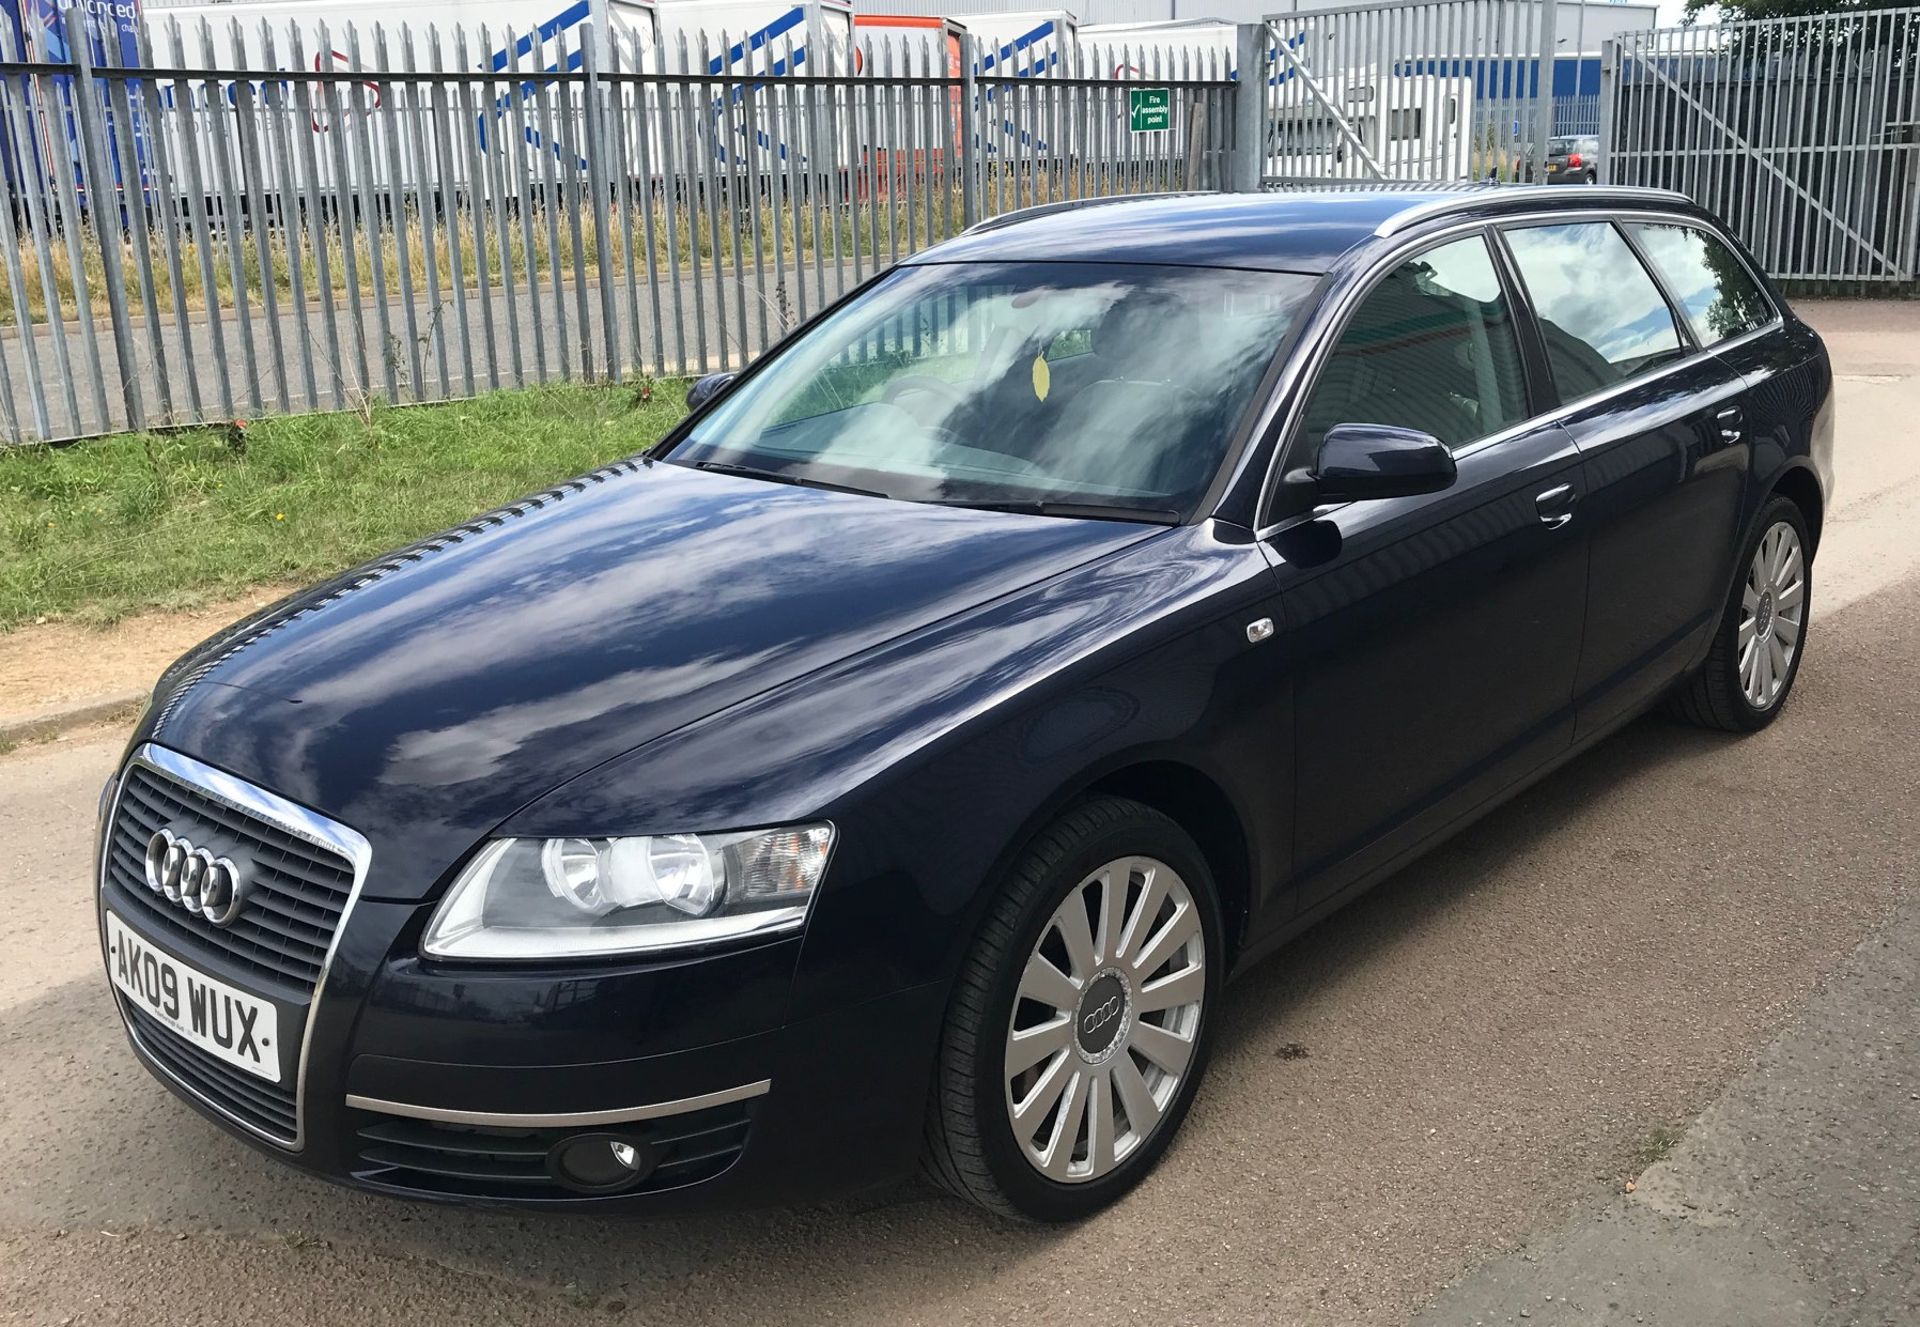 2009 Audi A6 2.0 Tdi Le 5 Door Estate - CL505 - NO VAT ON THE HAMMER - Location: Corby, Northamptons - Image 19 of 19